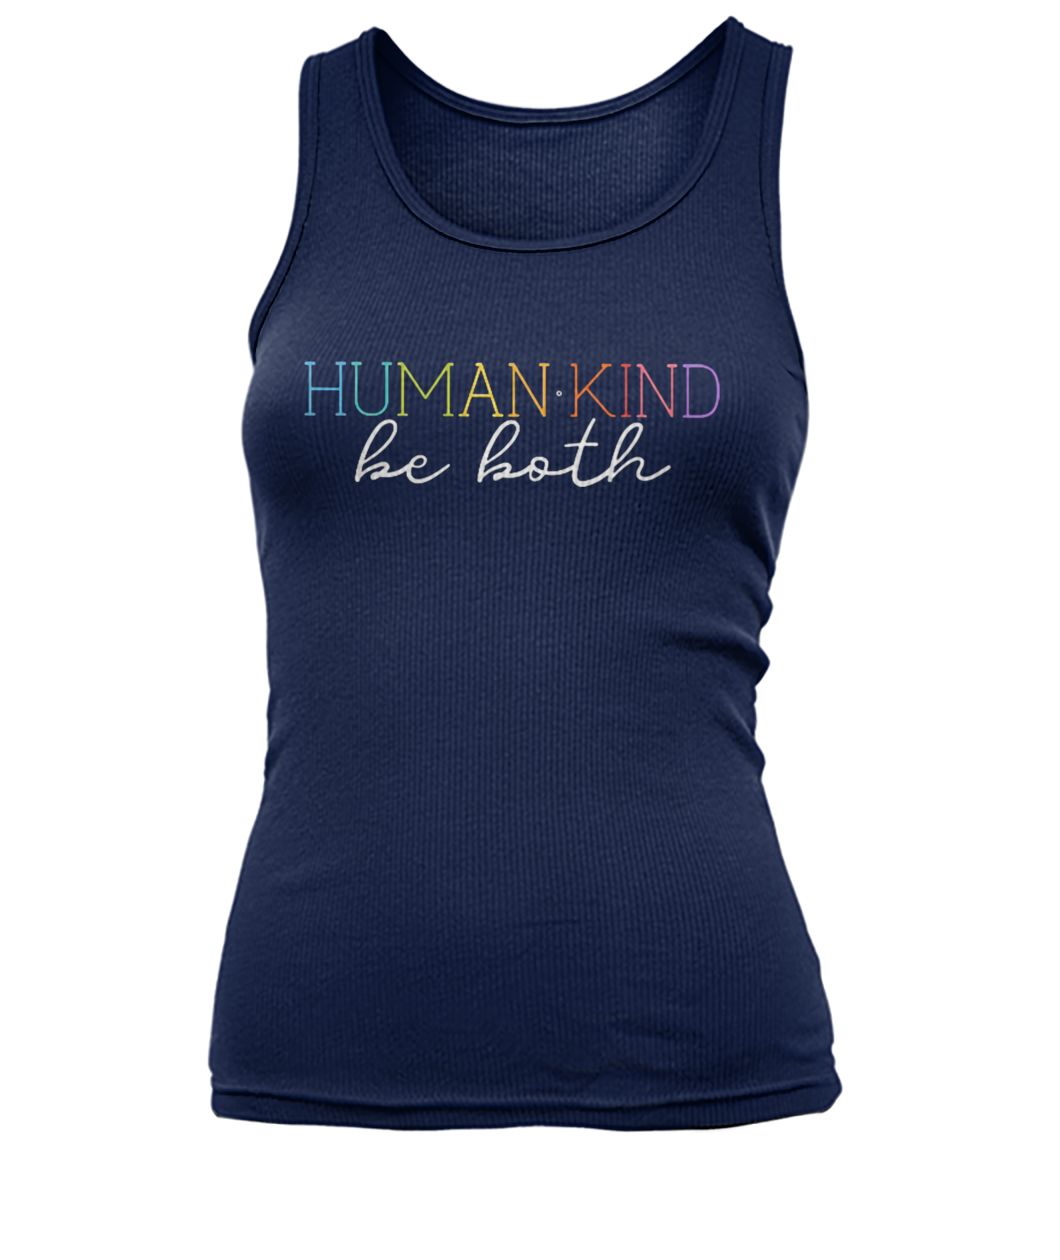 Humankind be both women's tank top